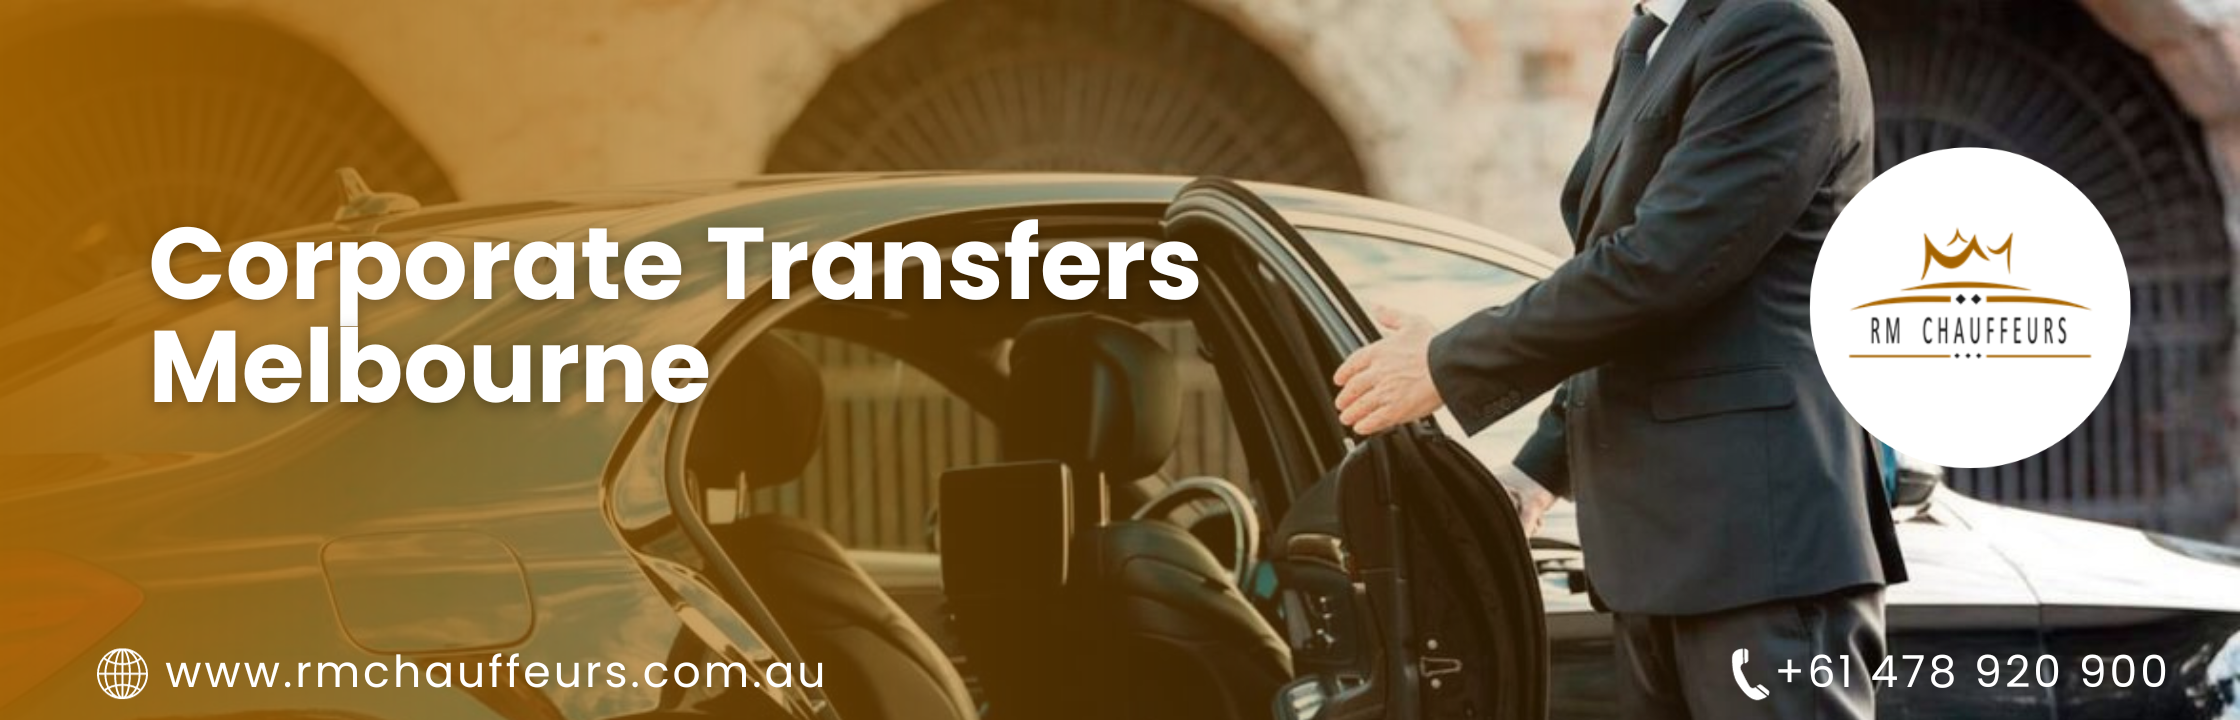 corporate transfers melbourne.pngby RM Chauffeurs